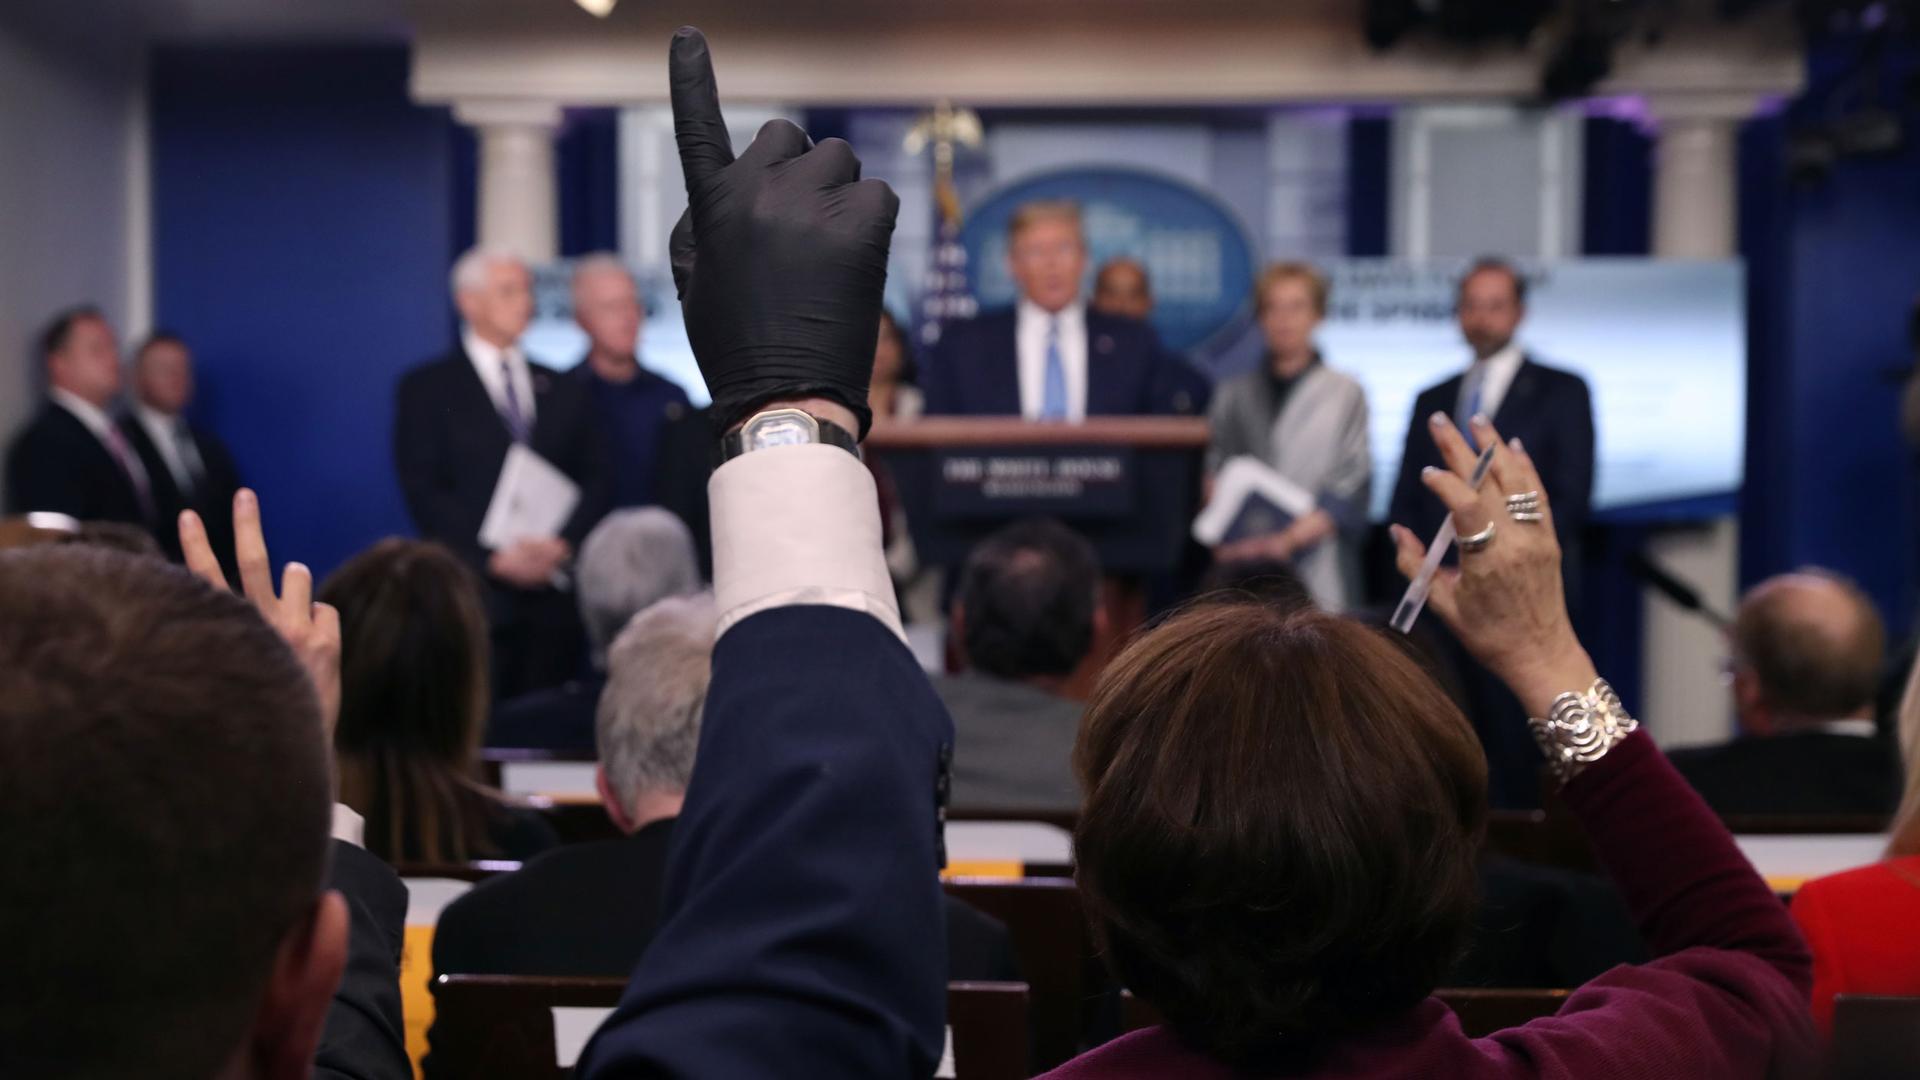 A group of reporters are shown sitting in chairs with one person holding up their hand which is covered by a dark colored latex glove.